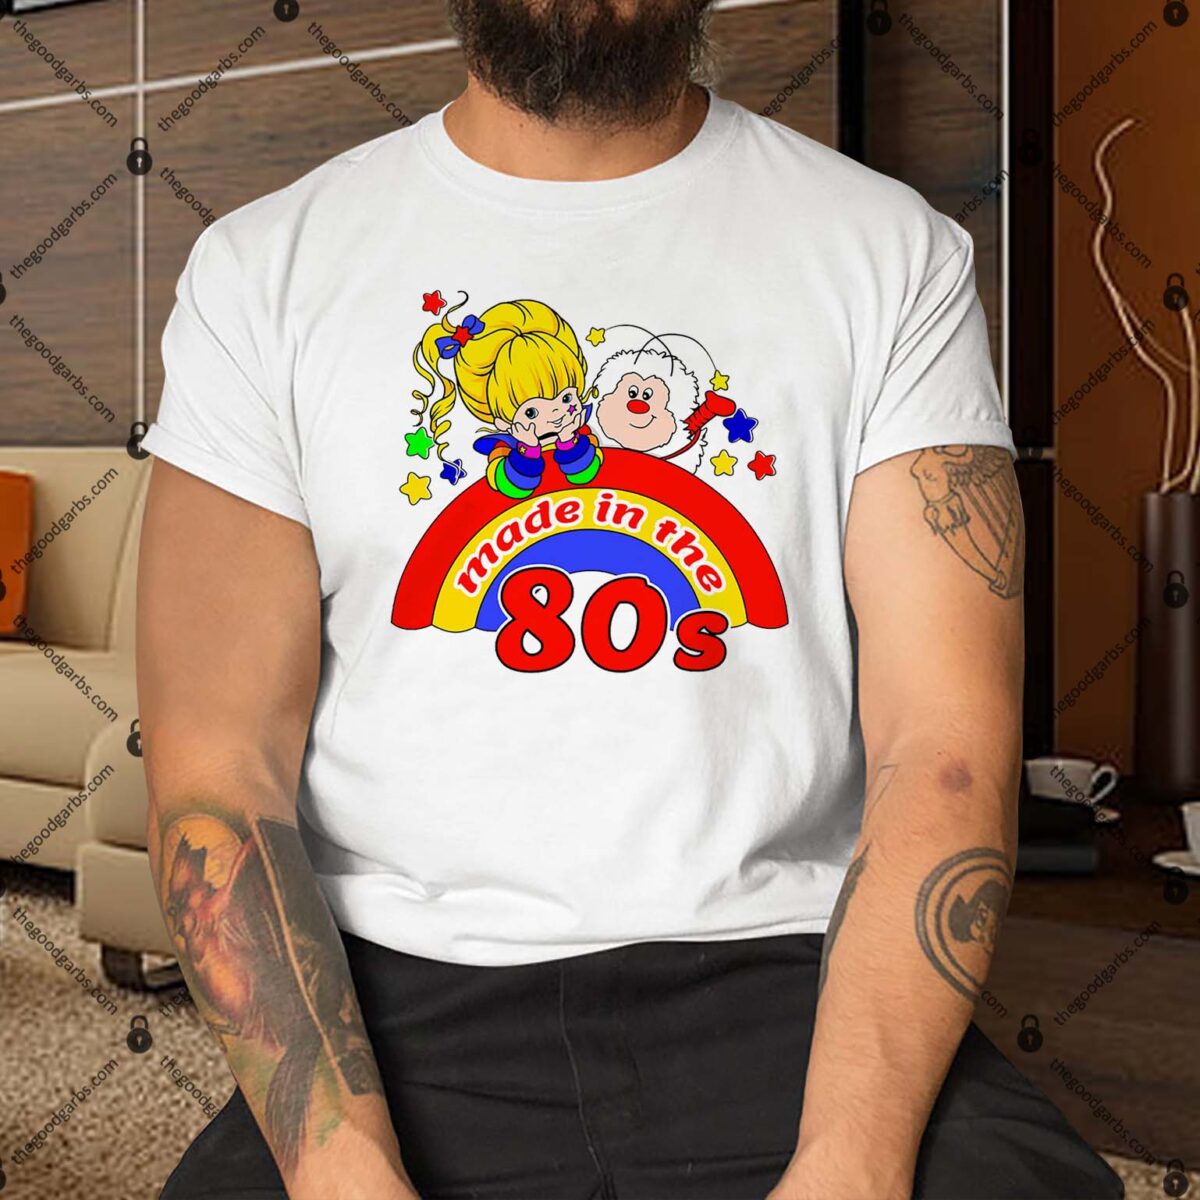 Womens Rainbow Brite Made In The 80s Fitted Shirt